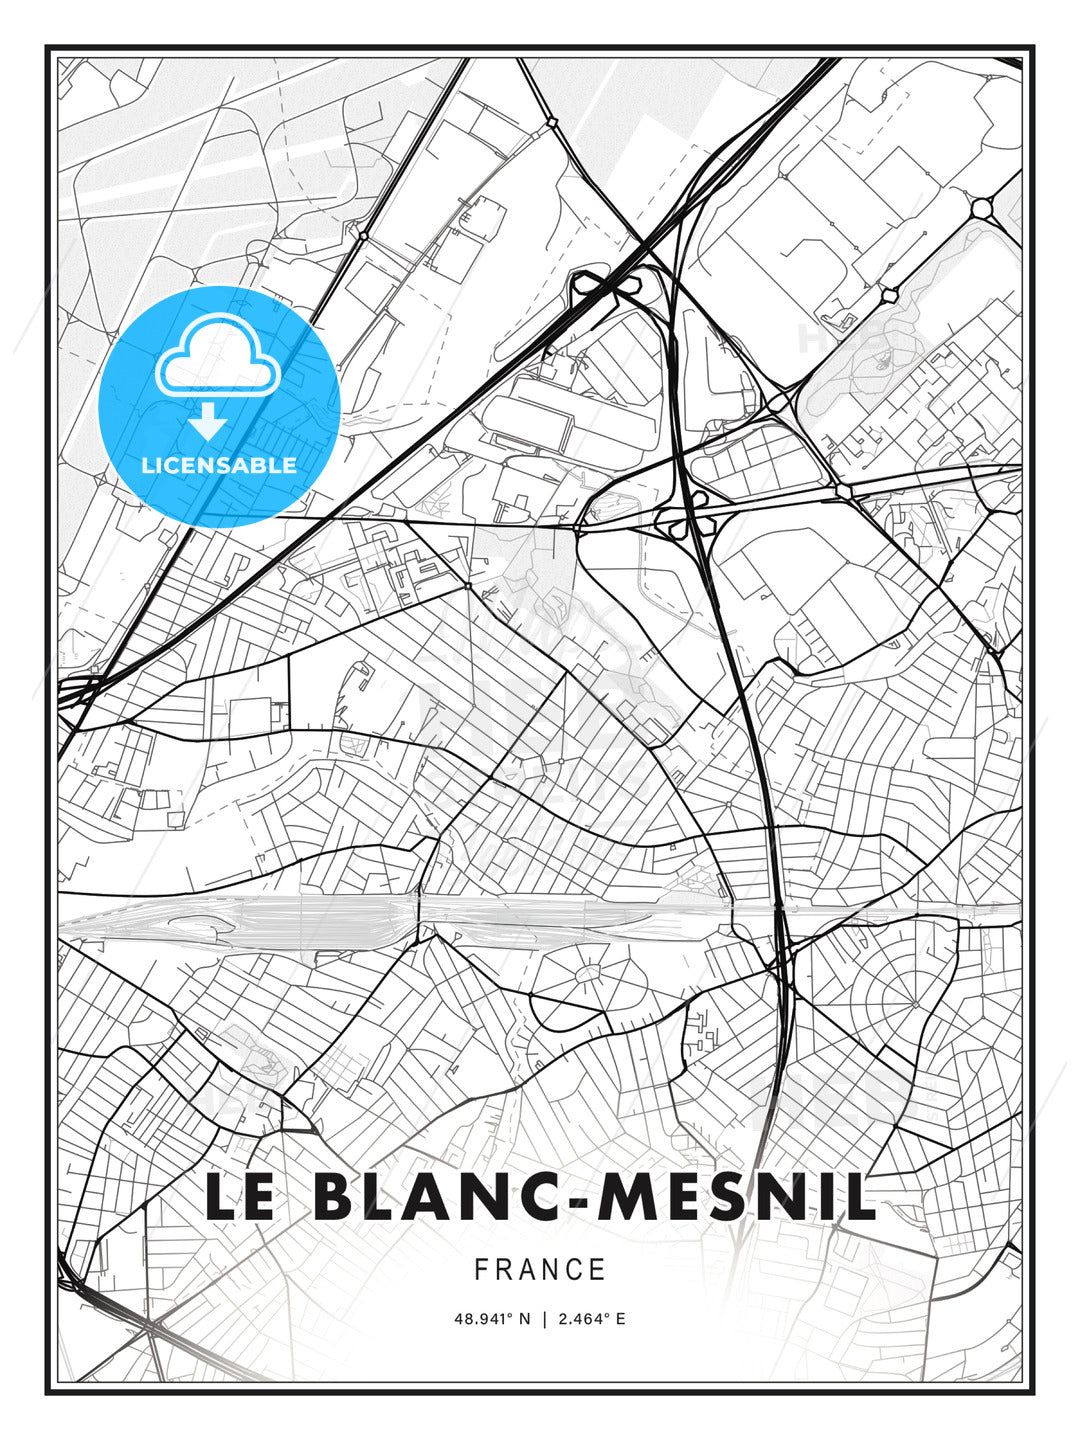 Le Blanc-Mesnil, France, Modern Print Template in Various Formats - HEBSTREITS Sketches